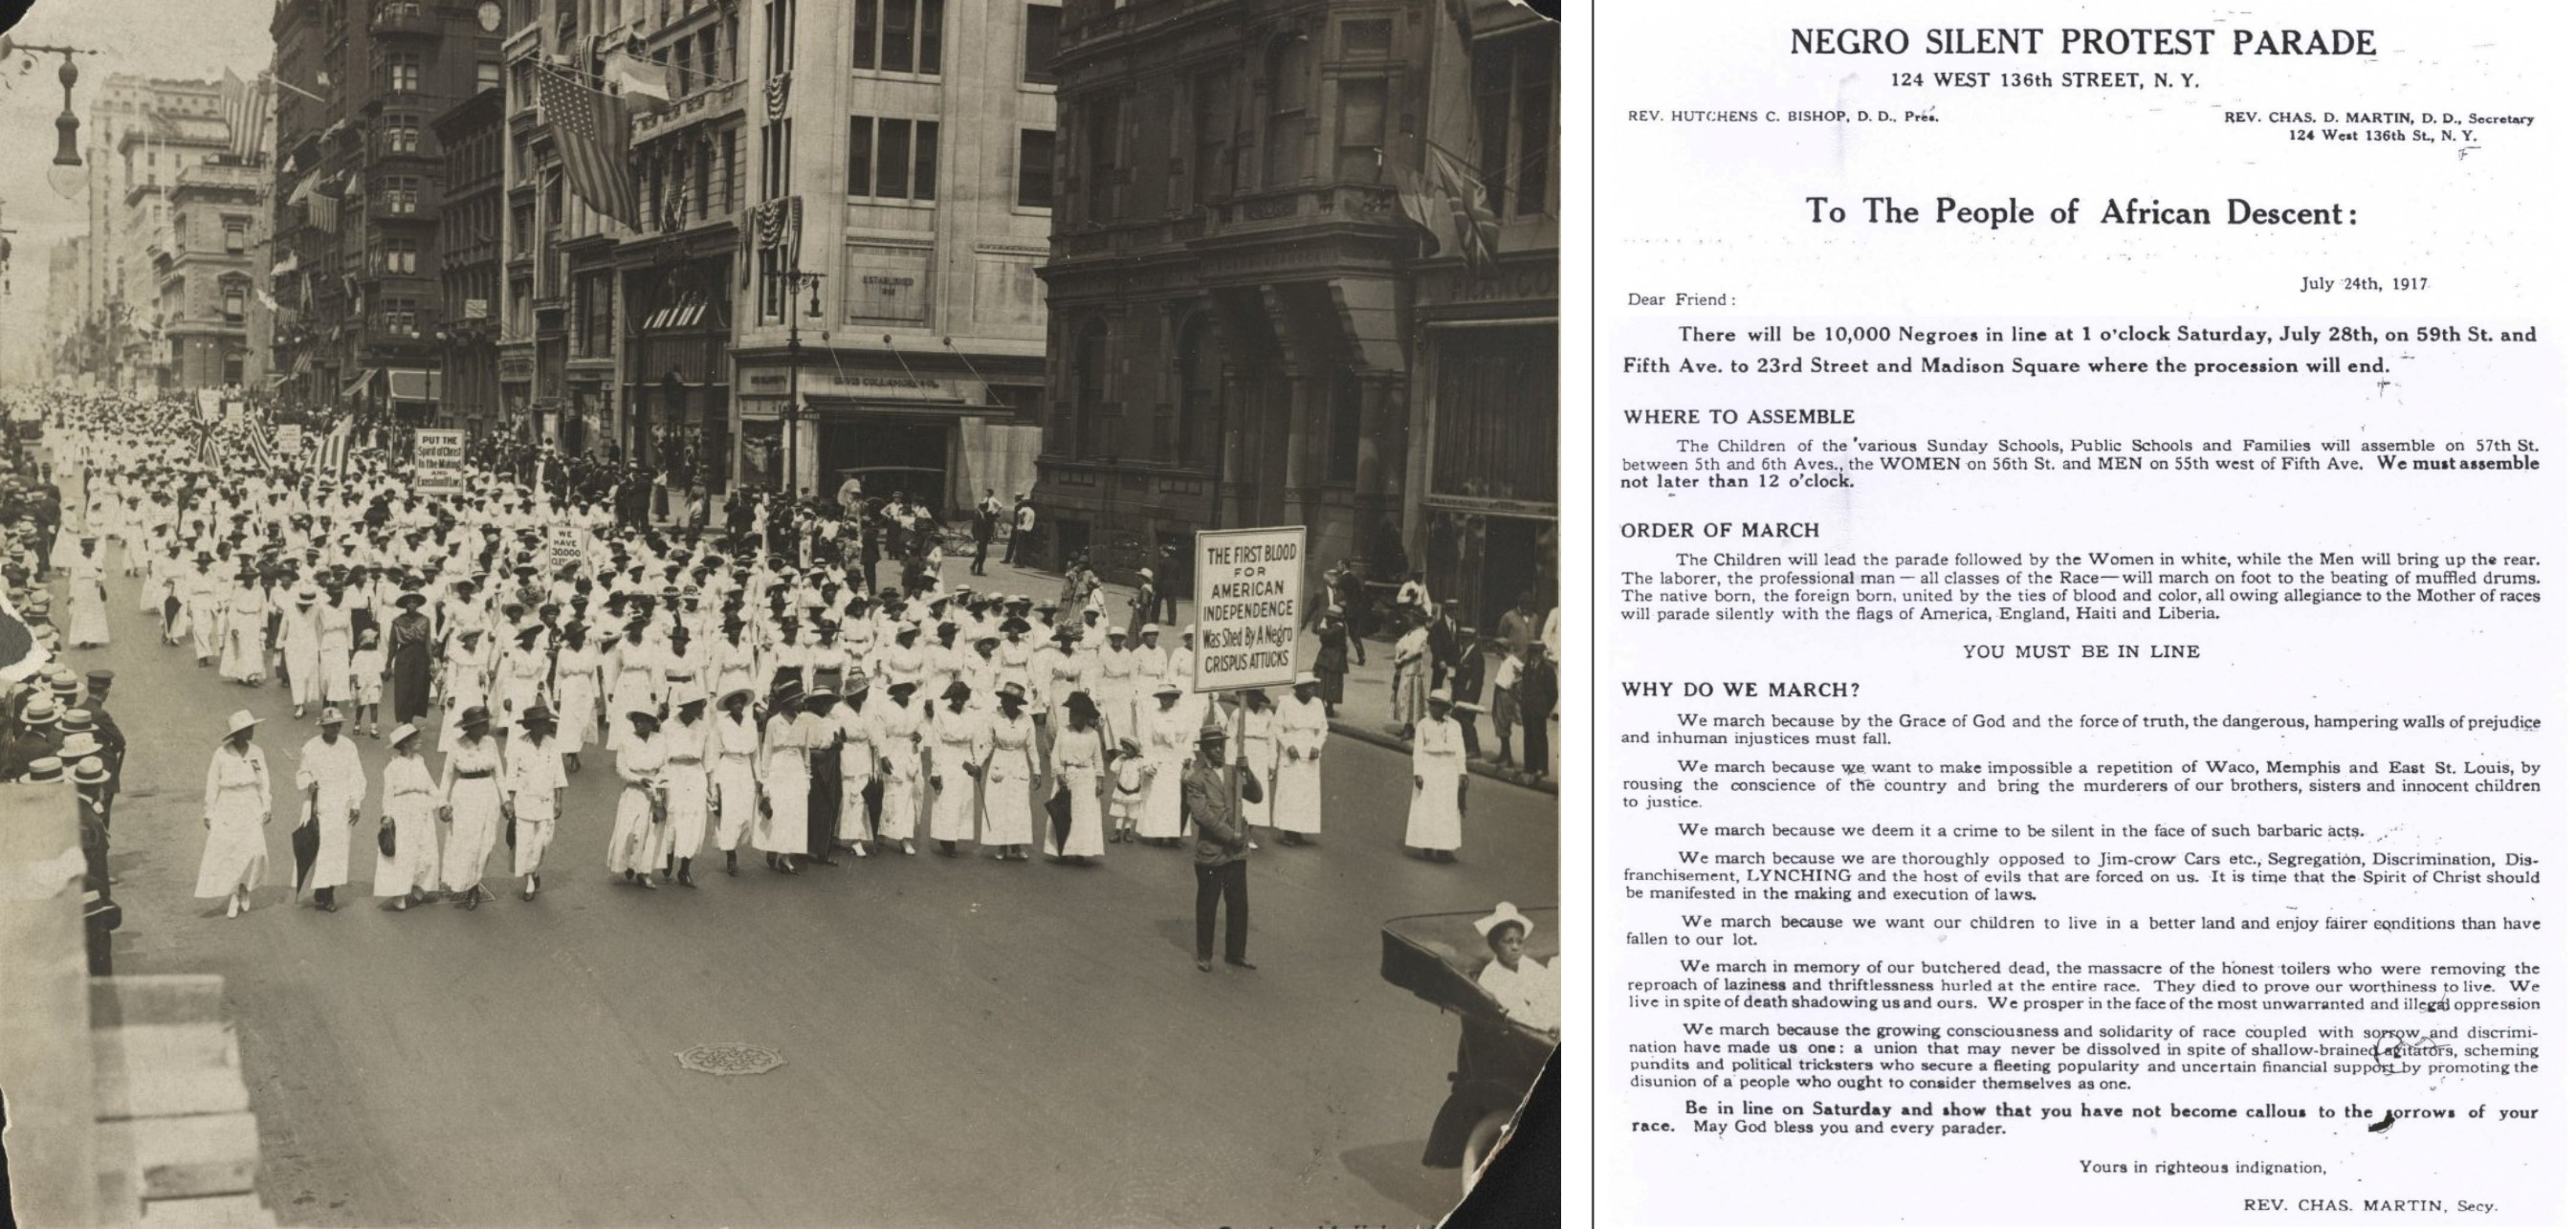 On the left, the Negro Silent Protest Parade. On the right, a flier advertising the Negro Silent Protest Parade.